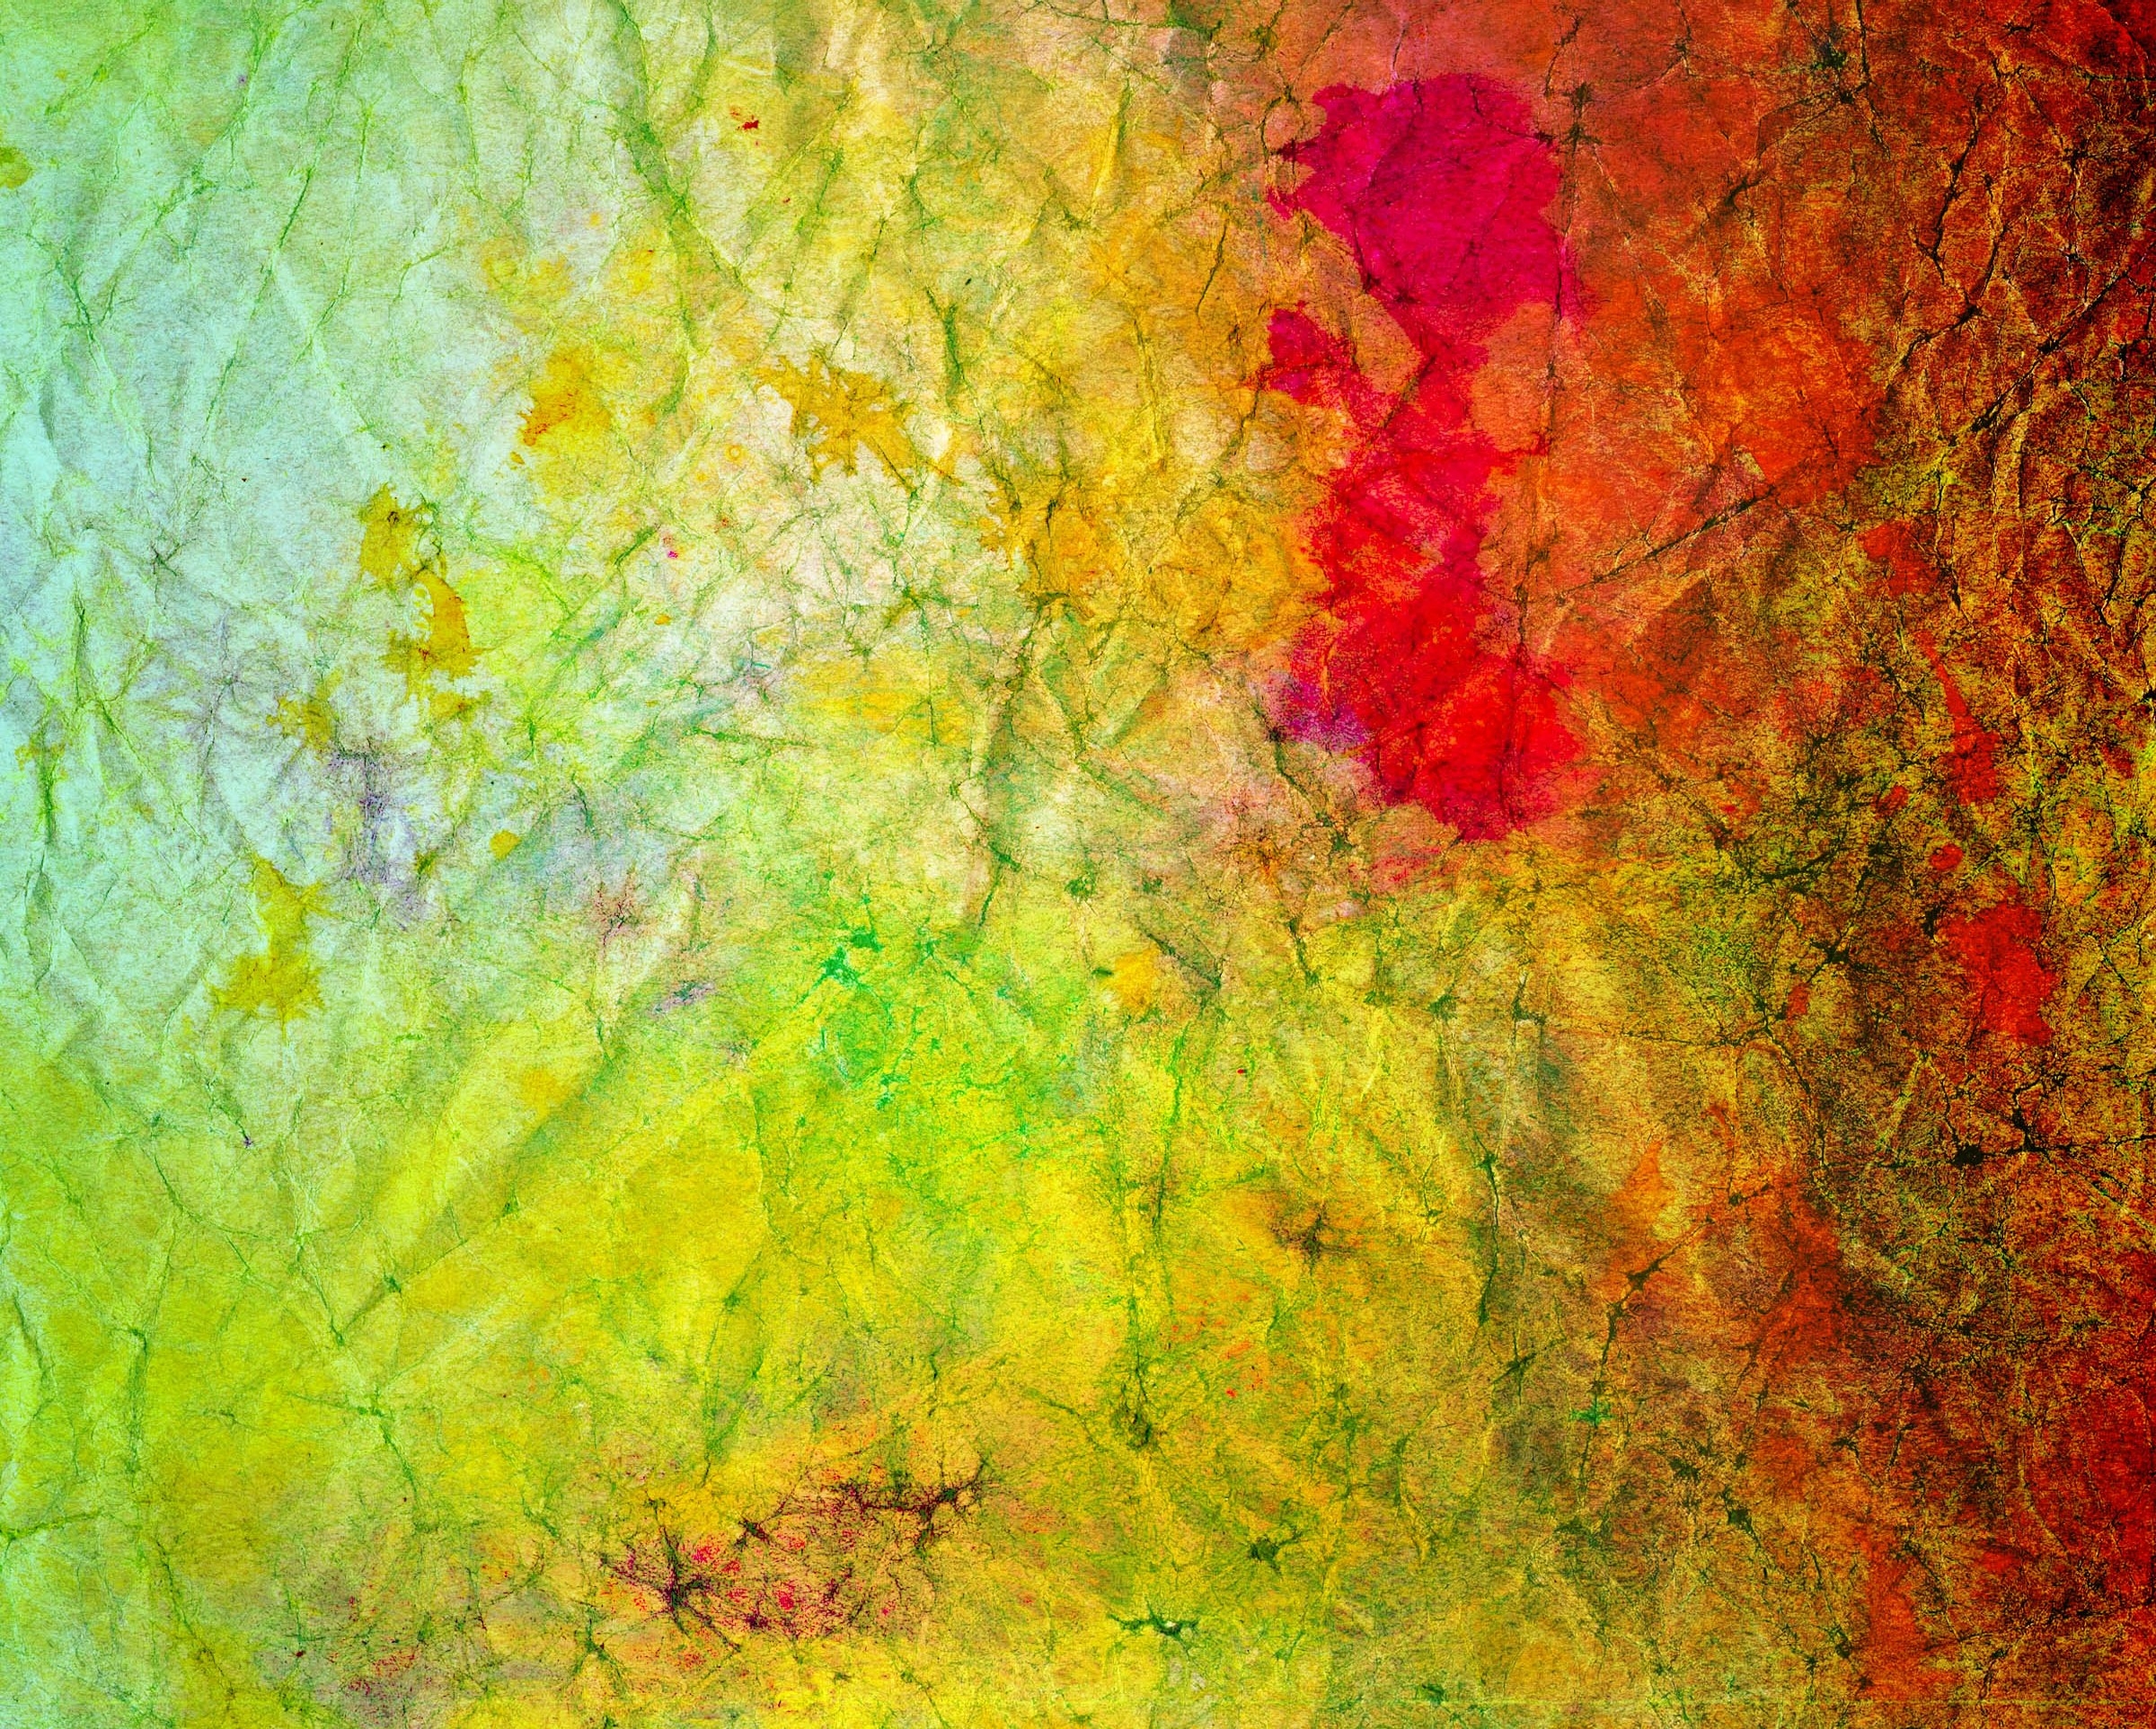 UHD wallpaper background, spotted, spotty, multicolored